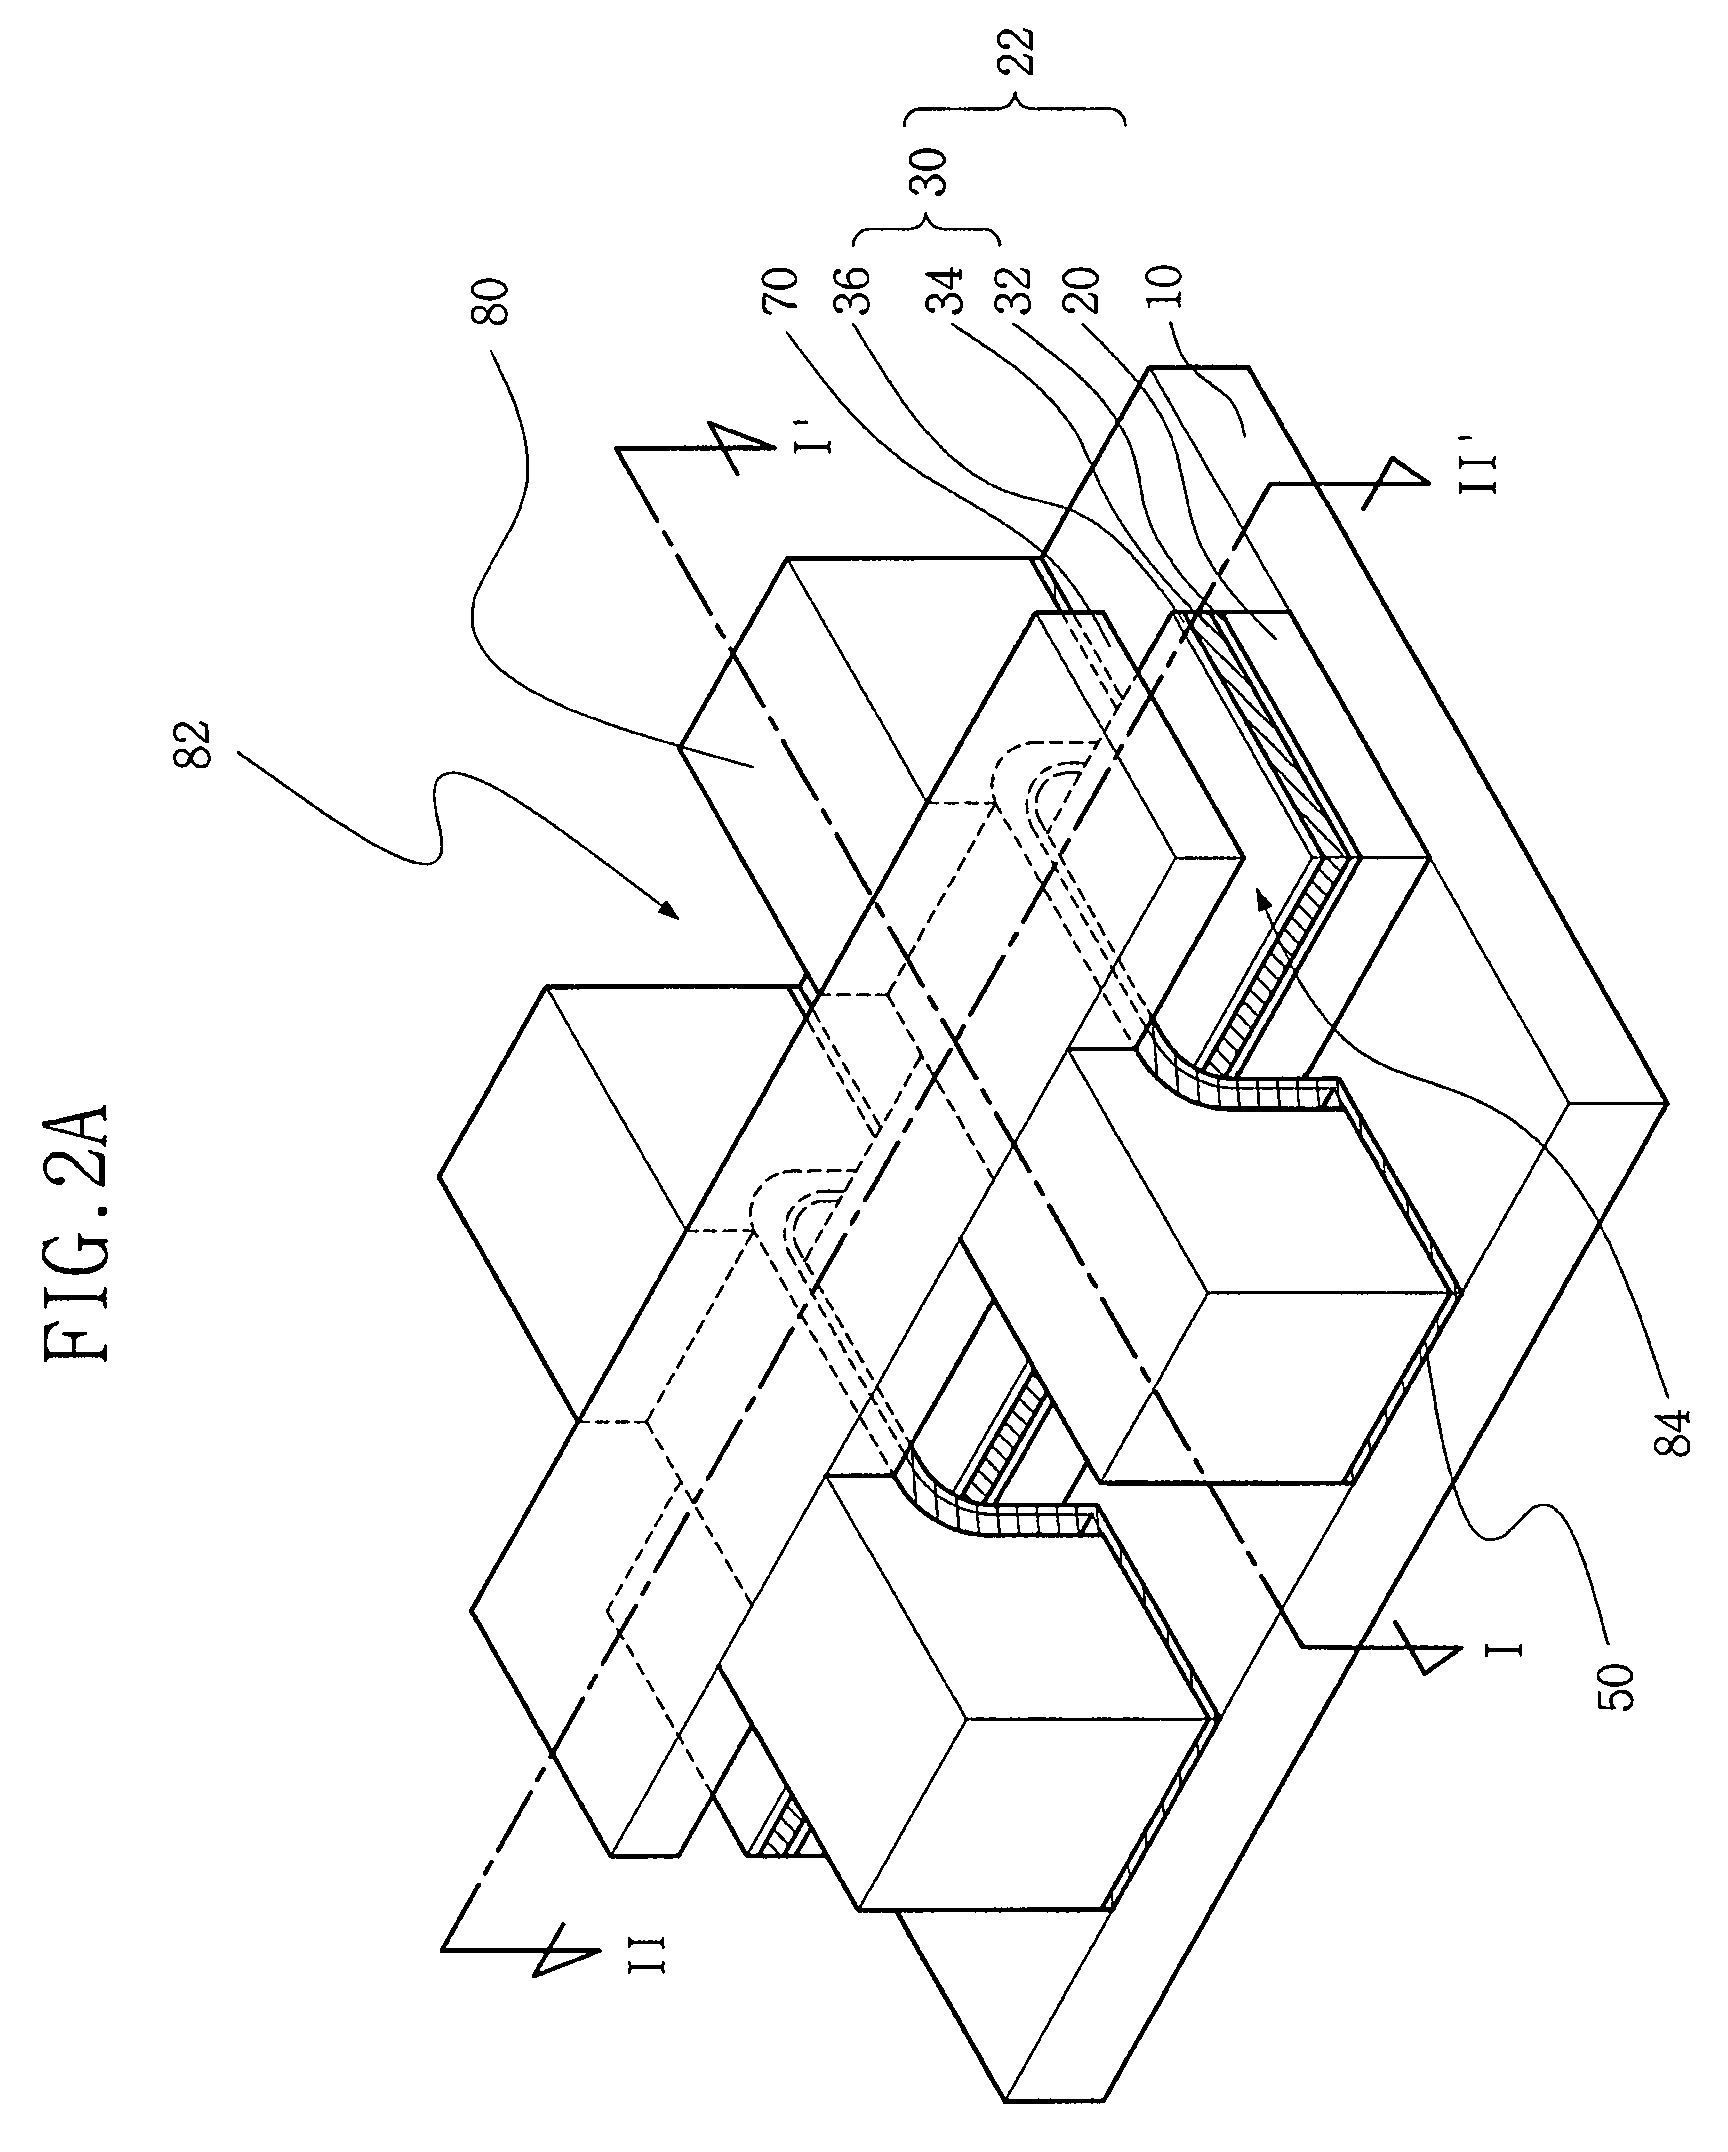 Electromechanical memory devices and methods of manufacturing the same